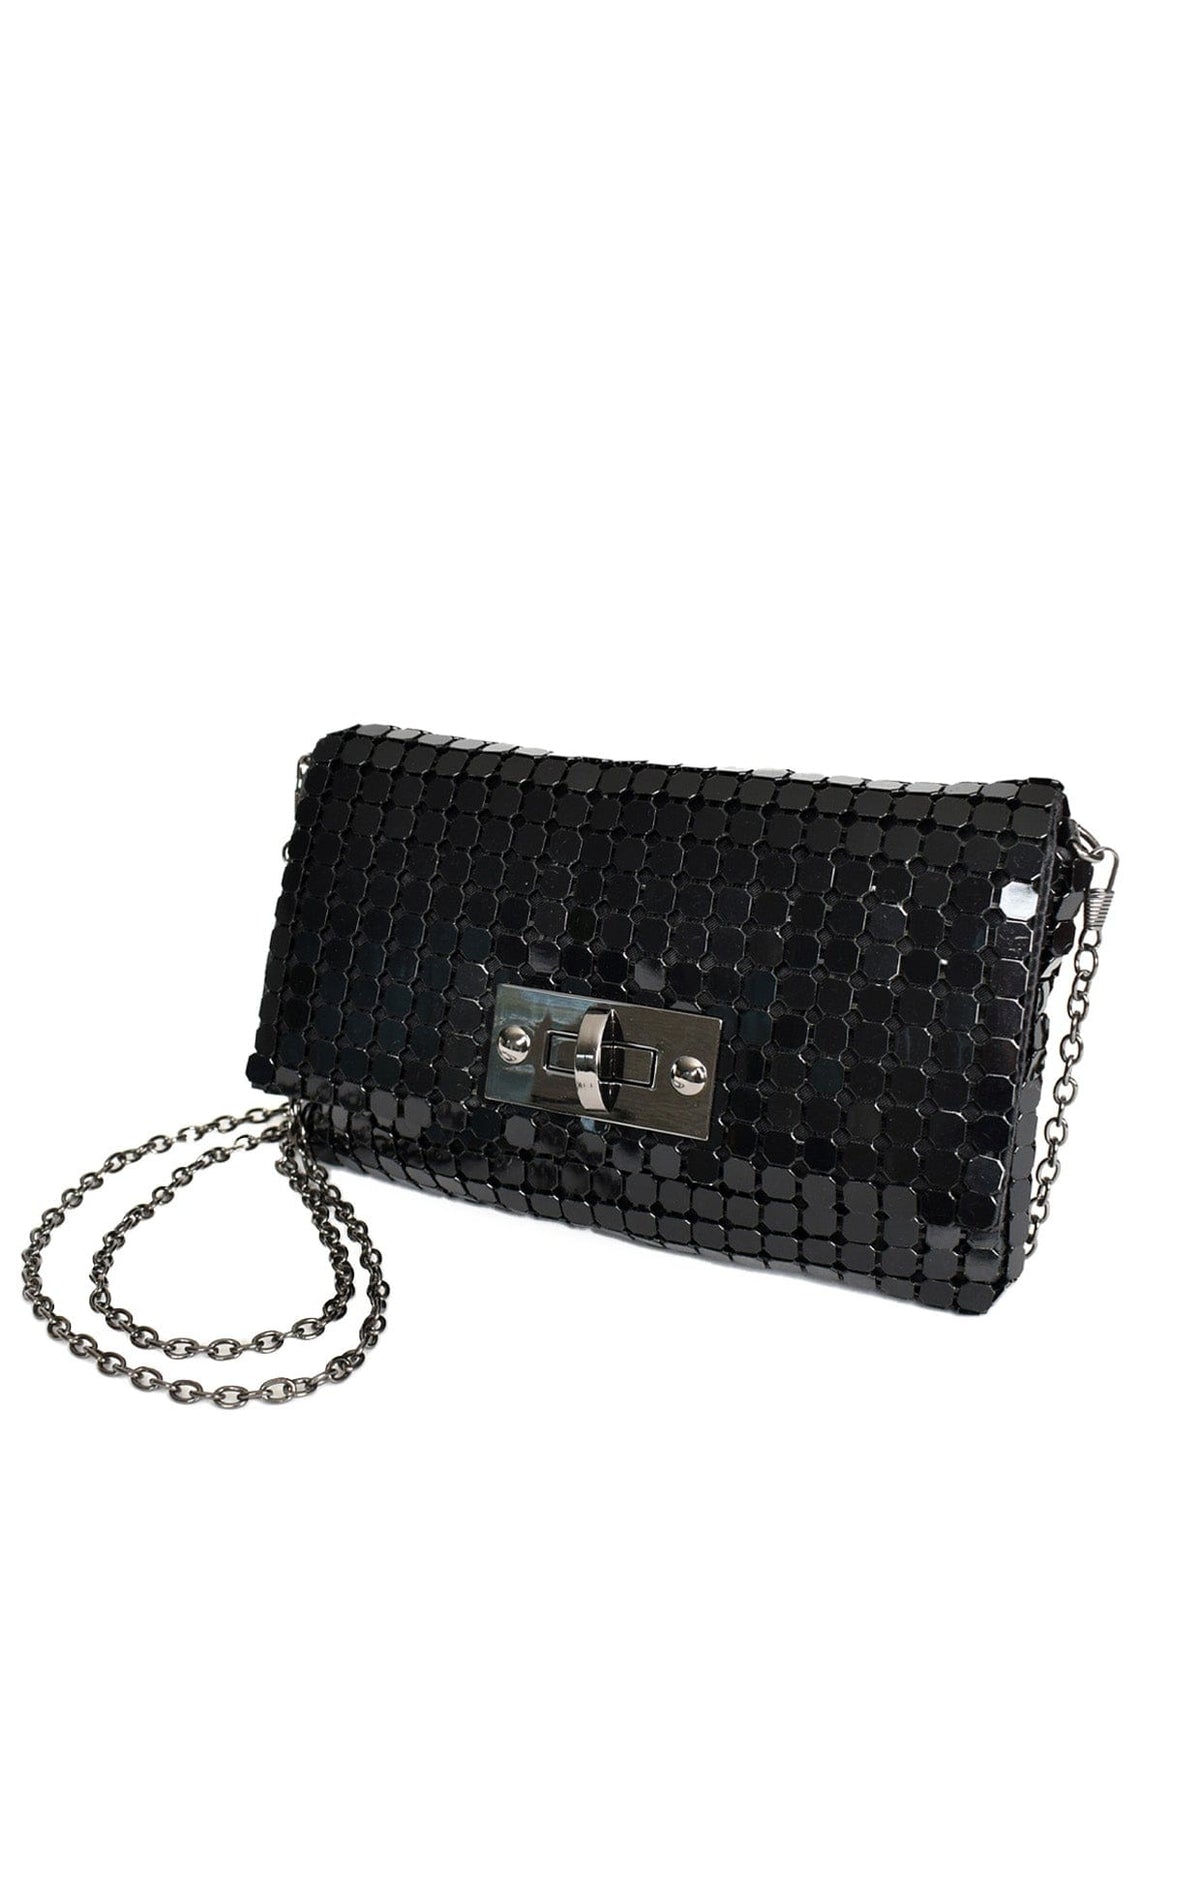 ACCESSORIES Bags Clutches One Size / Black CHAIN MESH TOGGLE FRONT CLUTCH IN BLACK